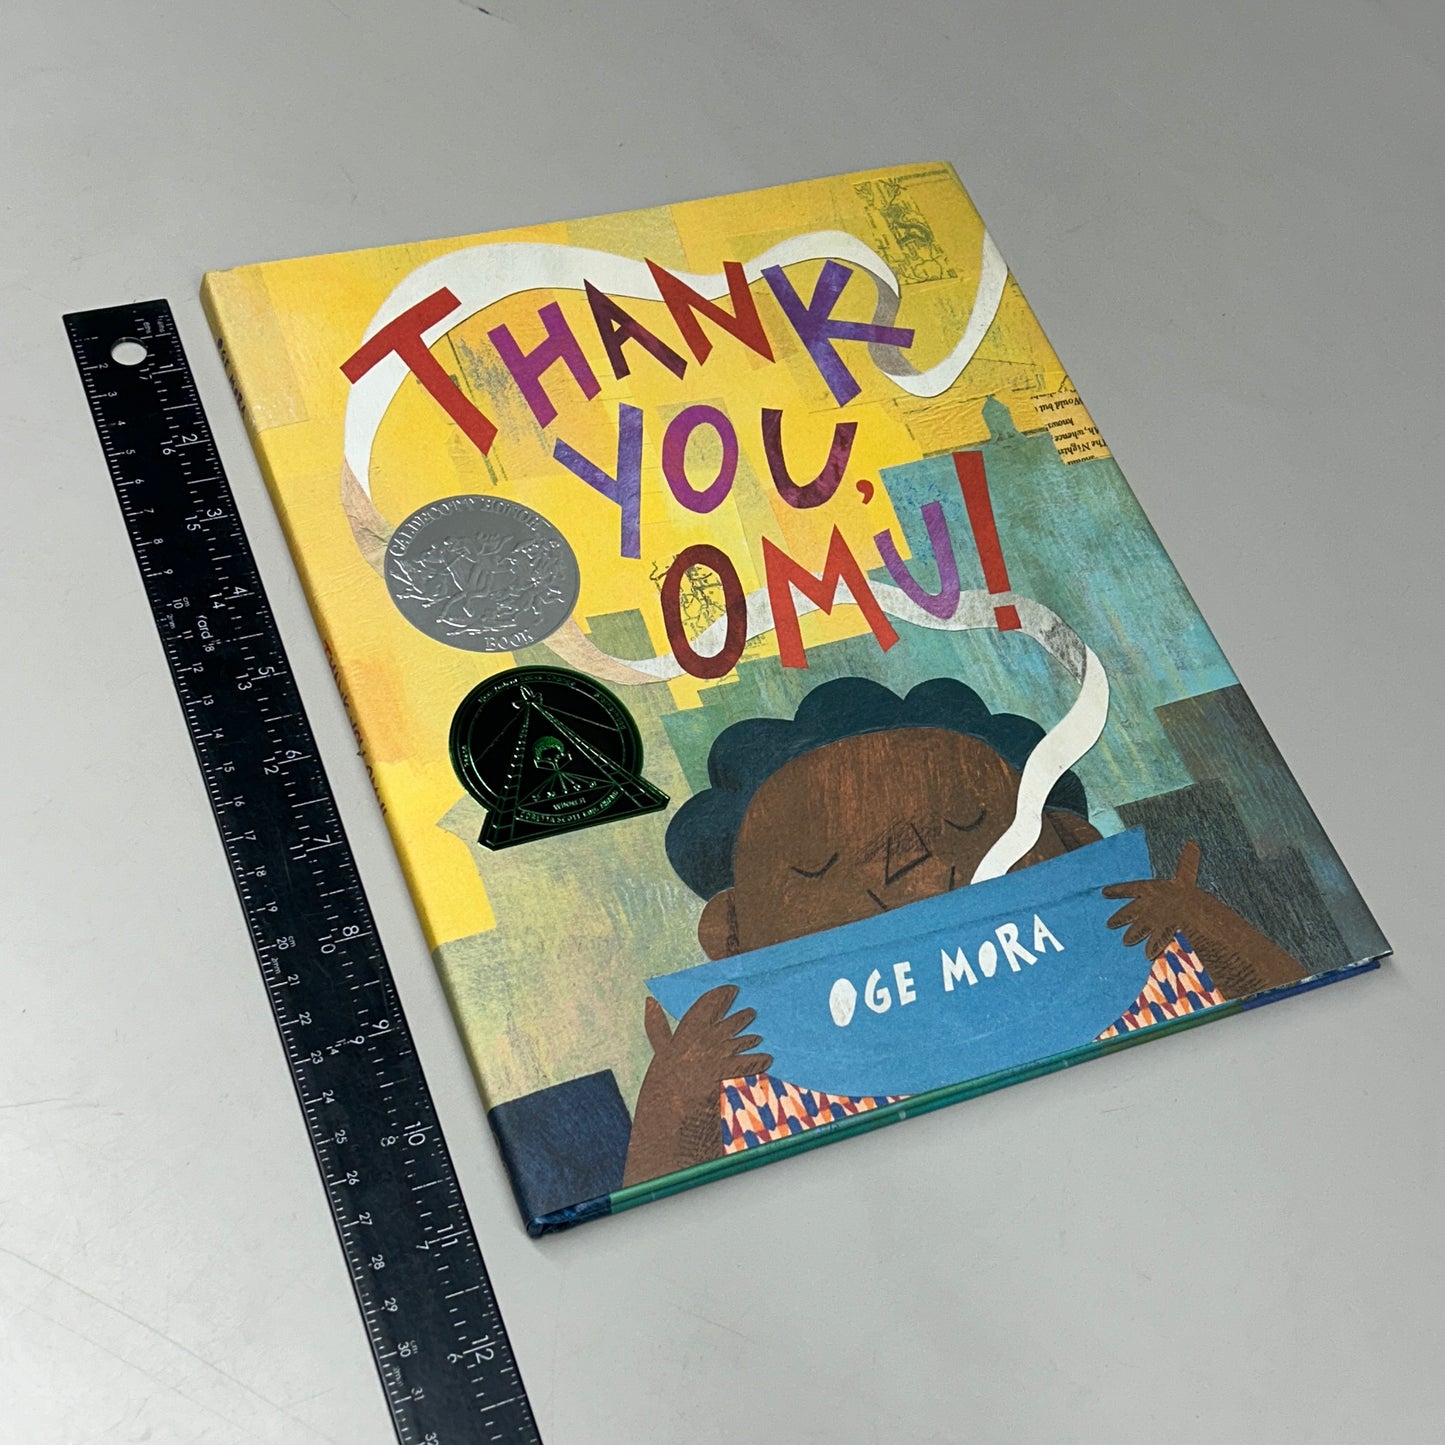 THANK YOU, OMU! By Oge Mora Hardcover (New)